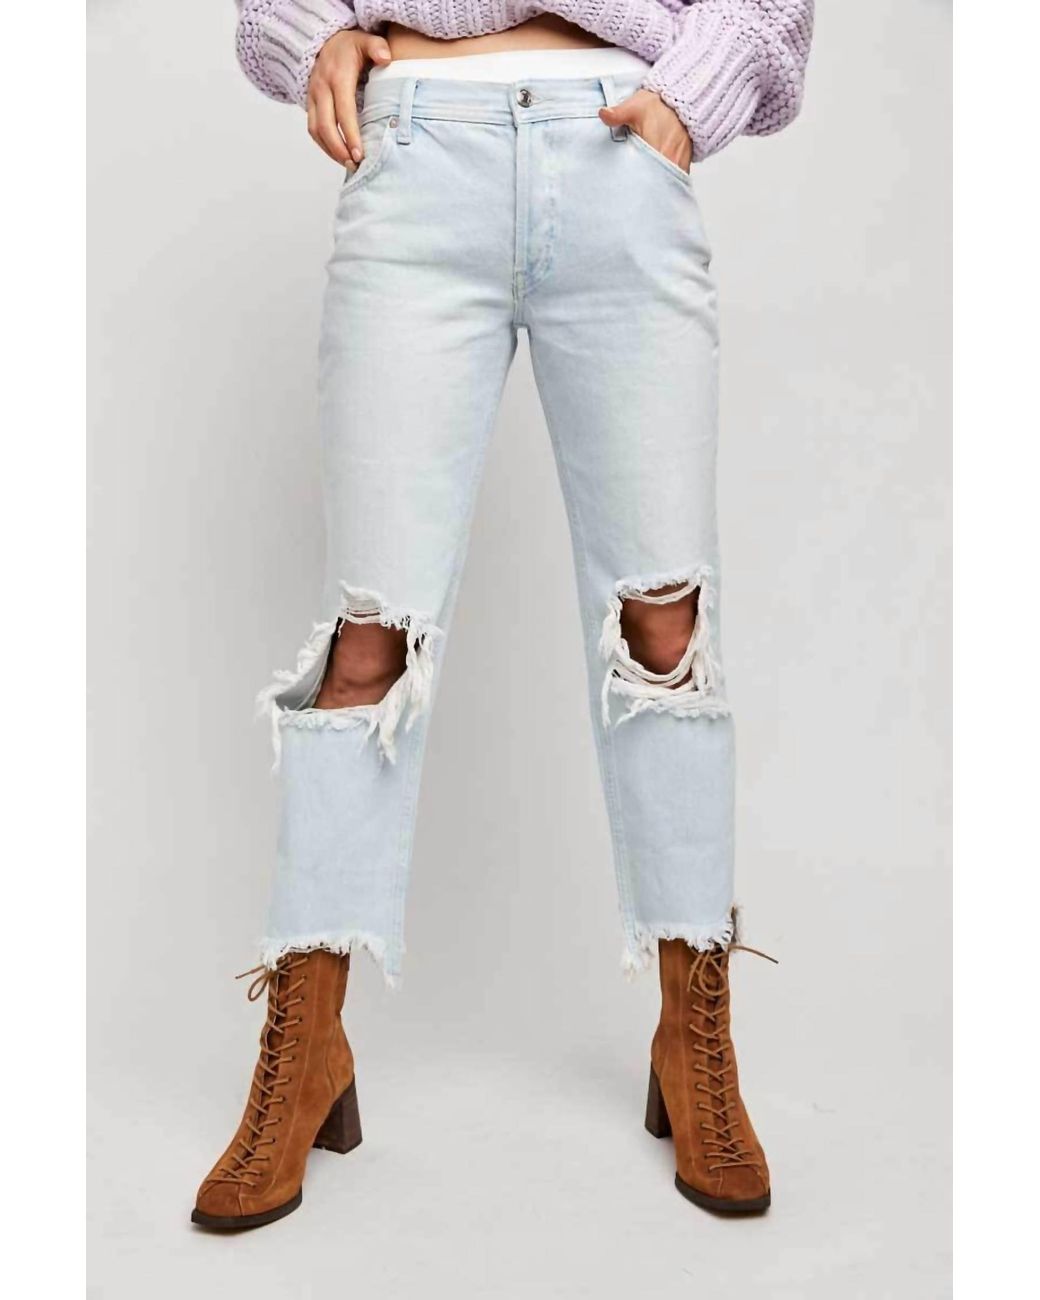 We The Free, Jeans, Free People Maggie Straight Leg Mid Rise Distressed  Denim Jeans Paradise Blue